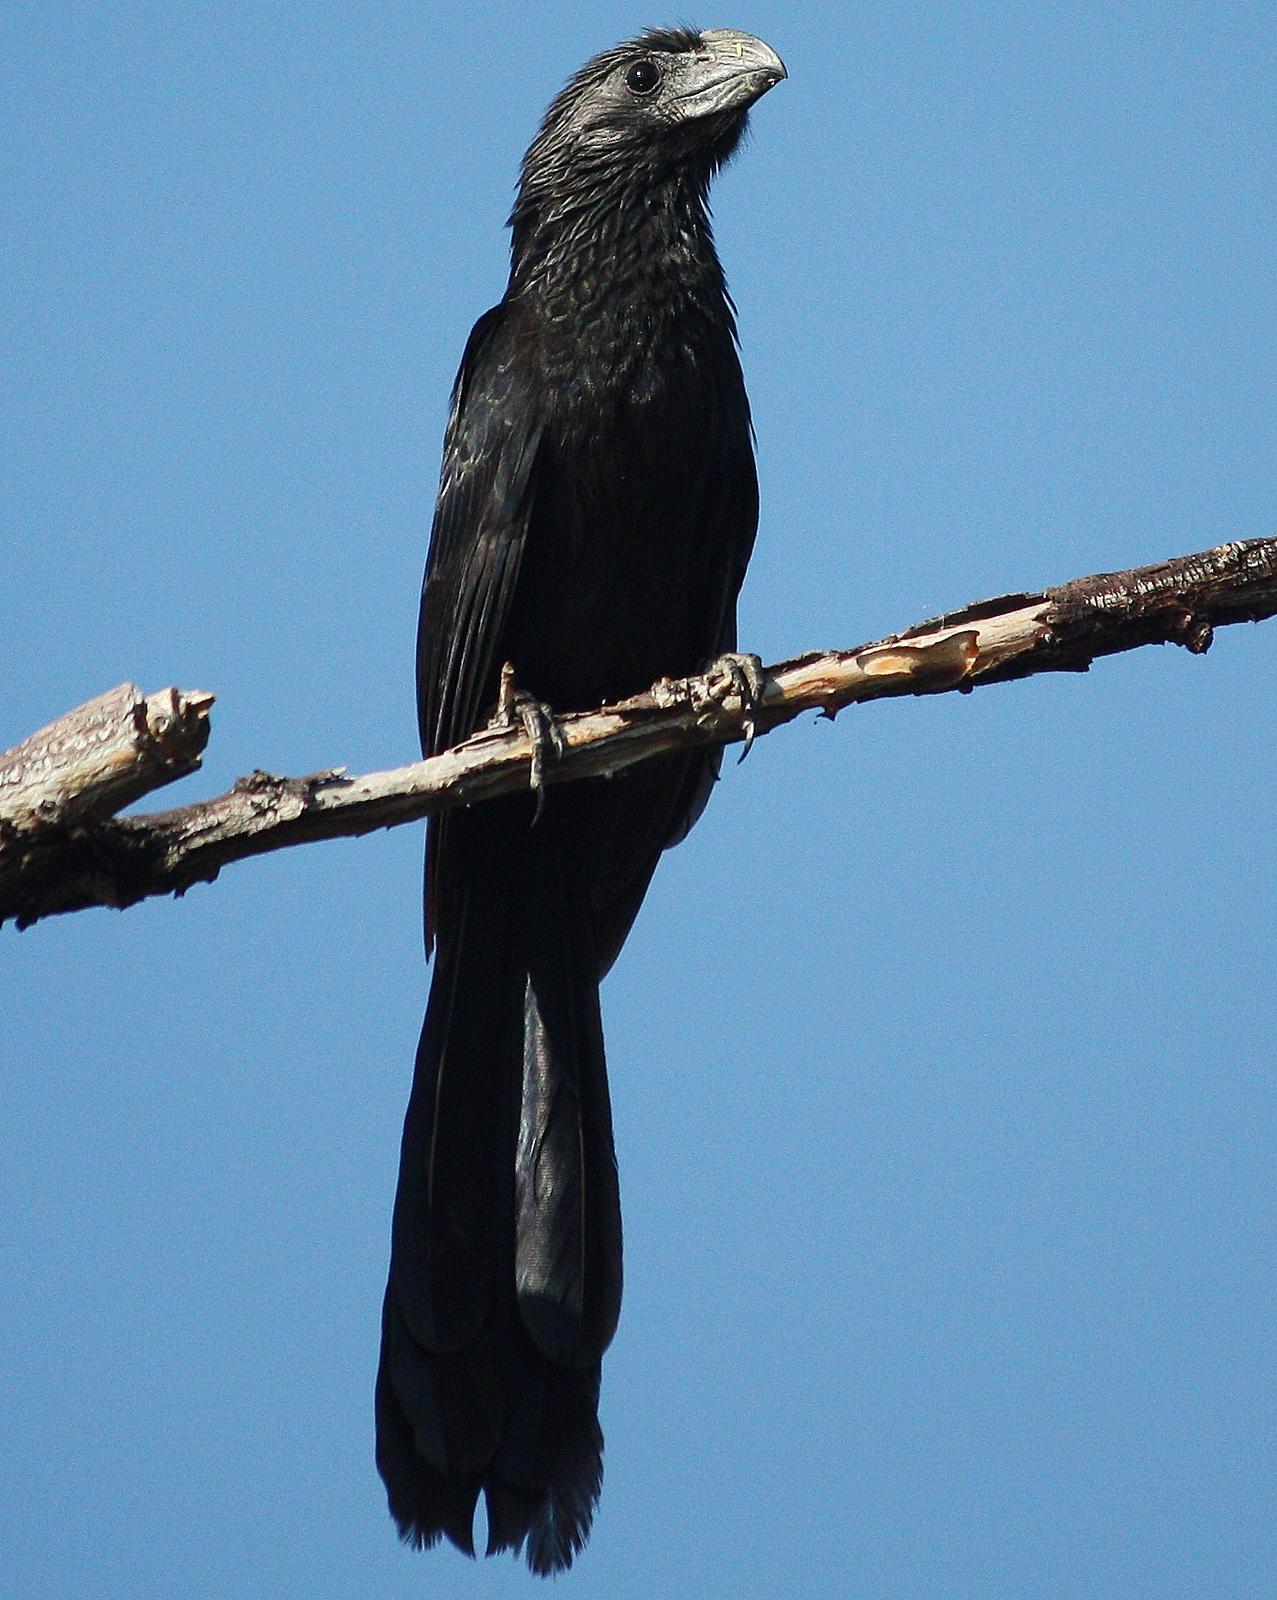 Groove-billed Ani Photo by Andrew Core